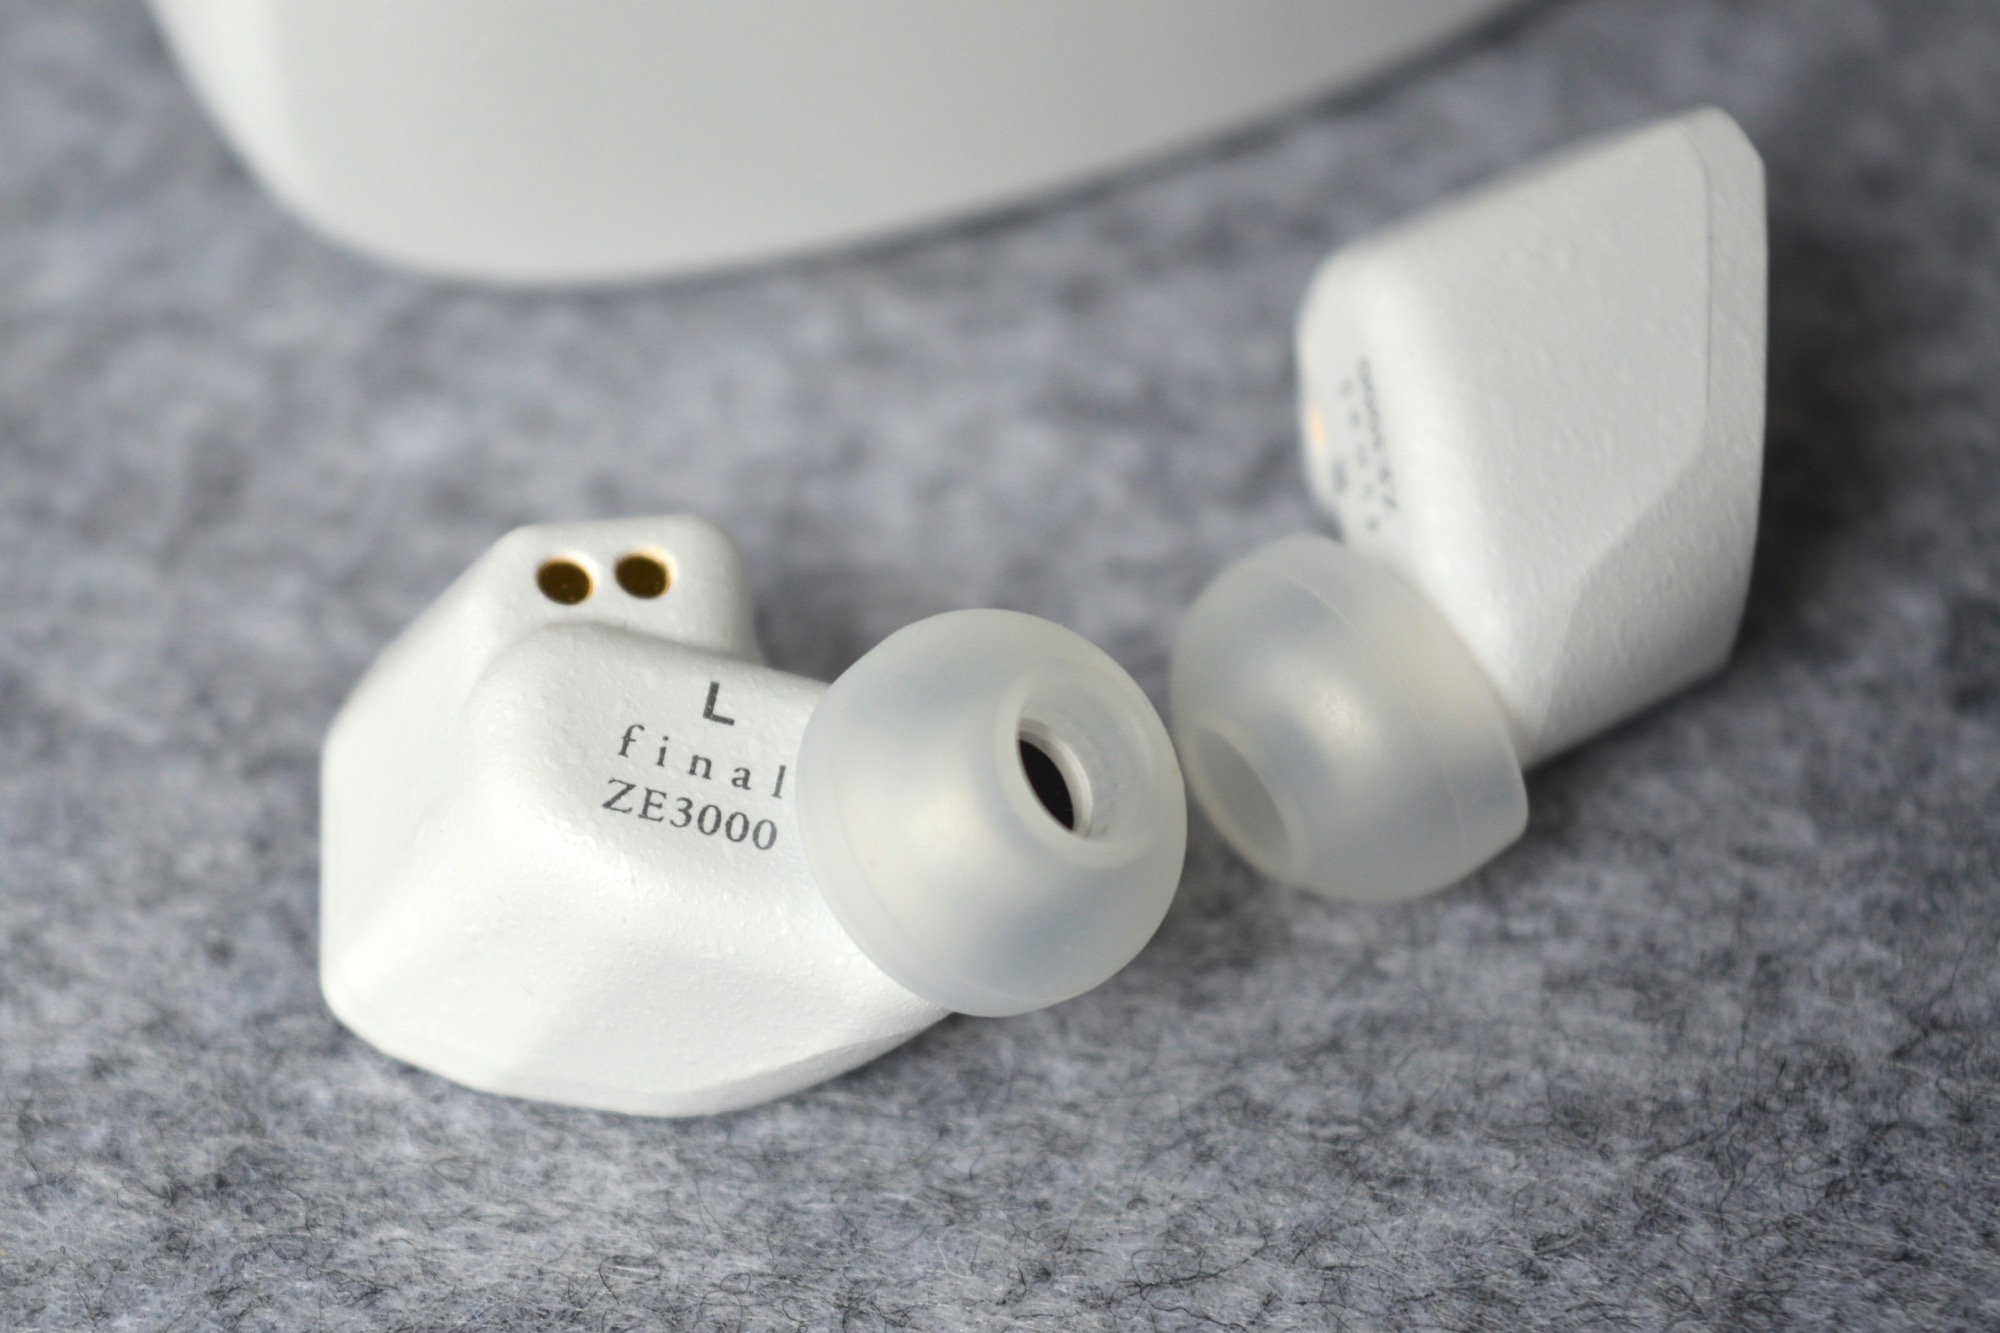 Close-up of the Final Audio ZE3000 wireless earbuds.